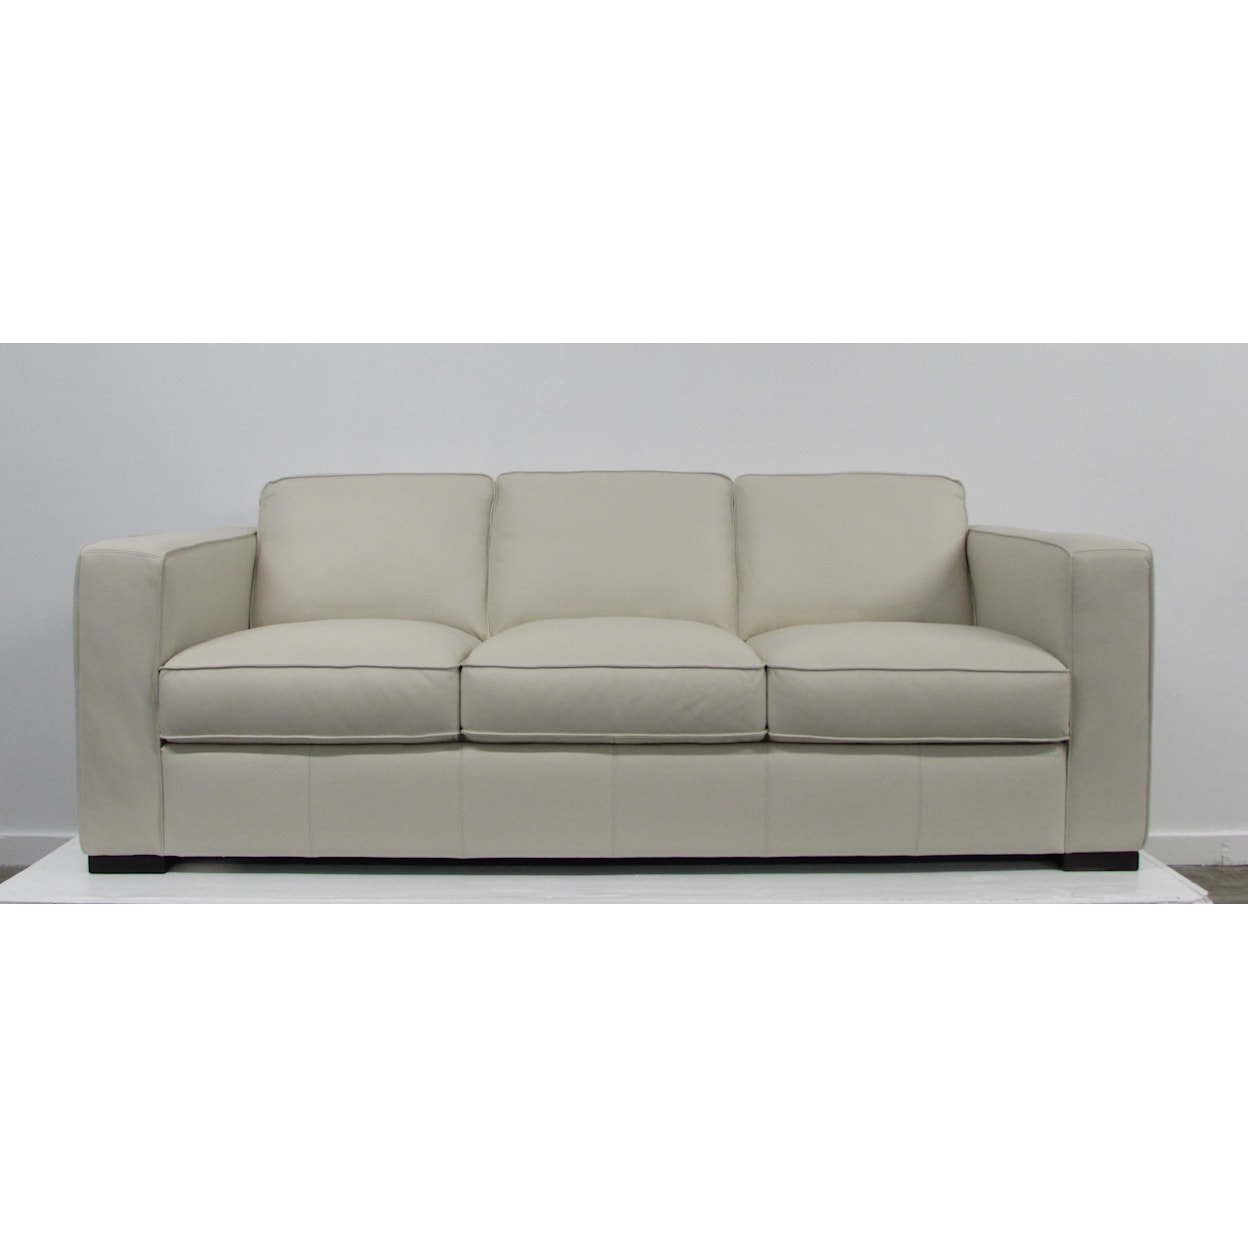 Natuzzi Editions C274 Leather Collection Ivory Leather Sofa